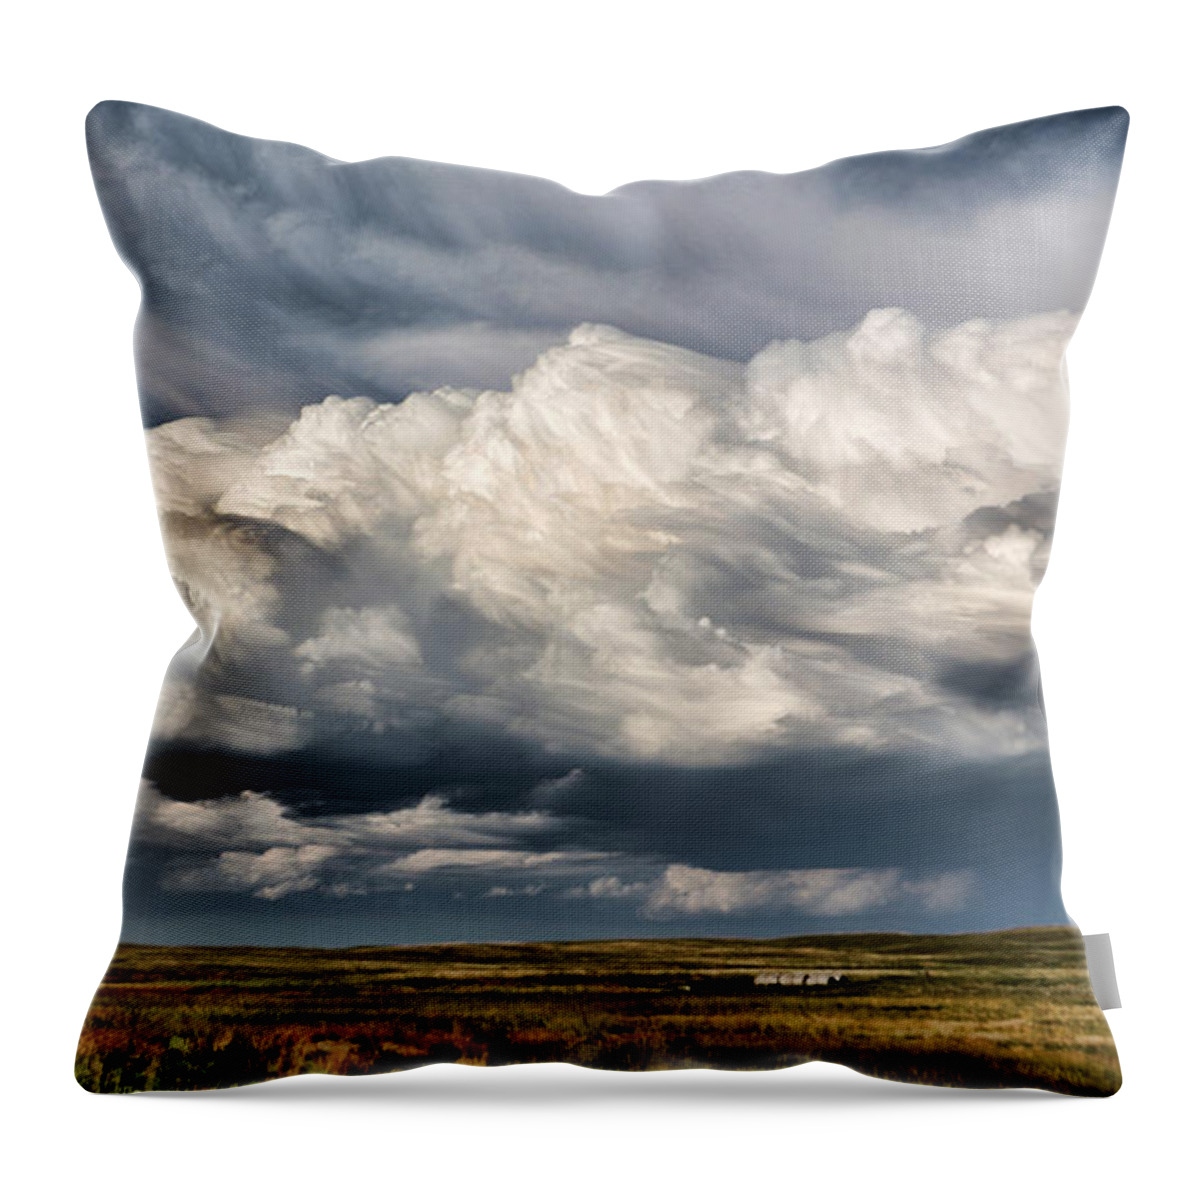 Bill Kesler Photography Throw Pillow featuring the photograph Thunderhead Breakdown by Bill Kesler